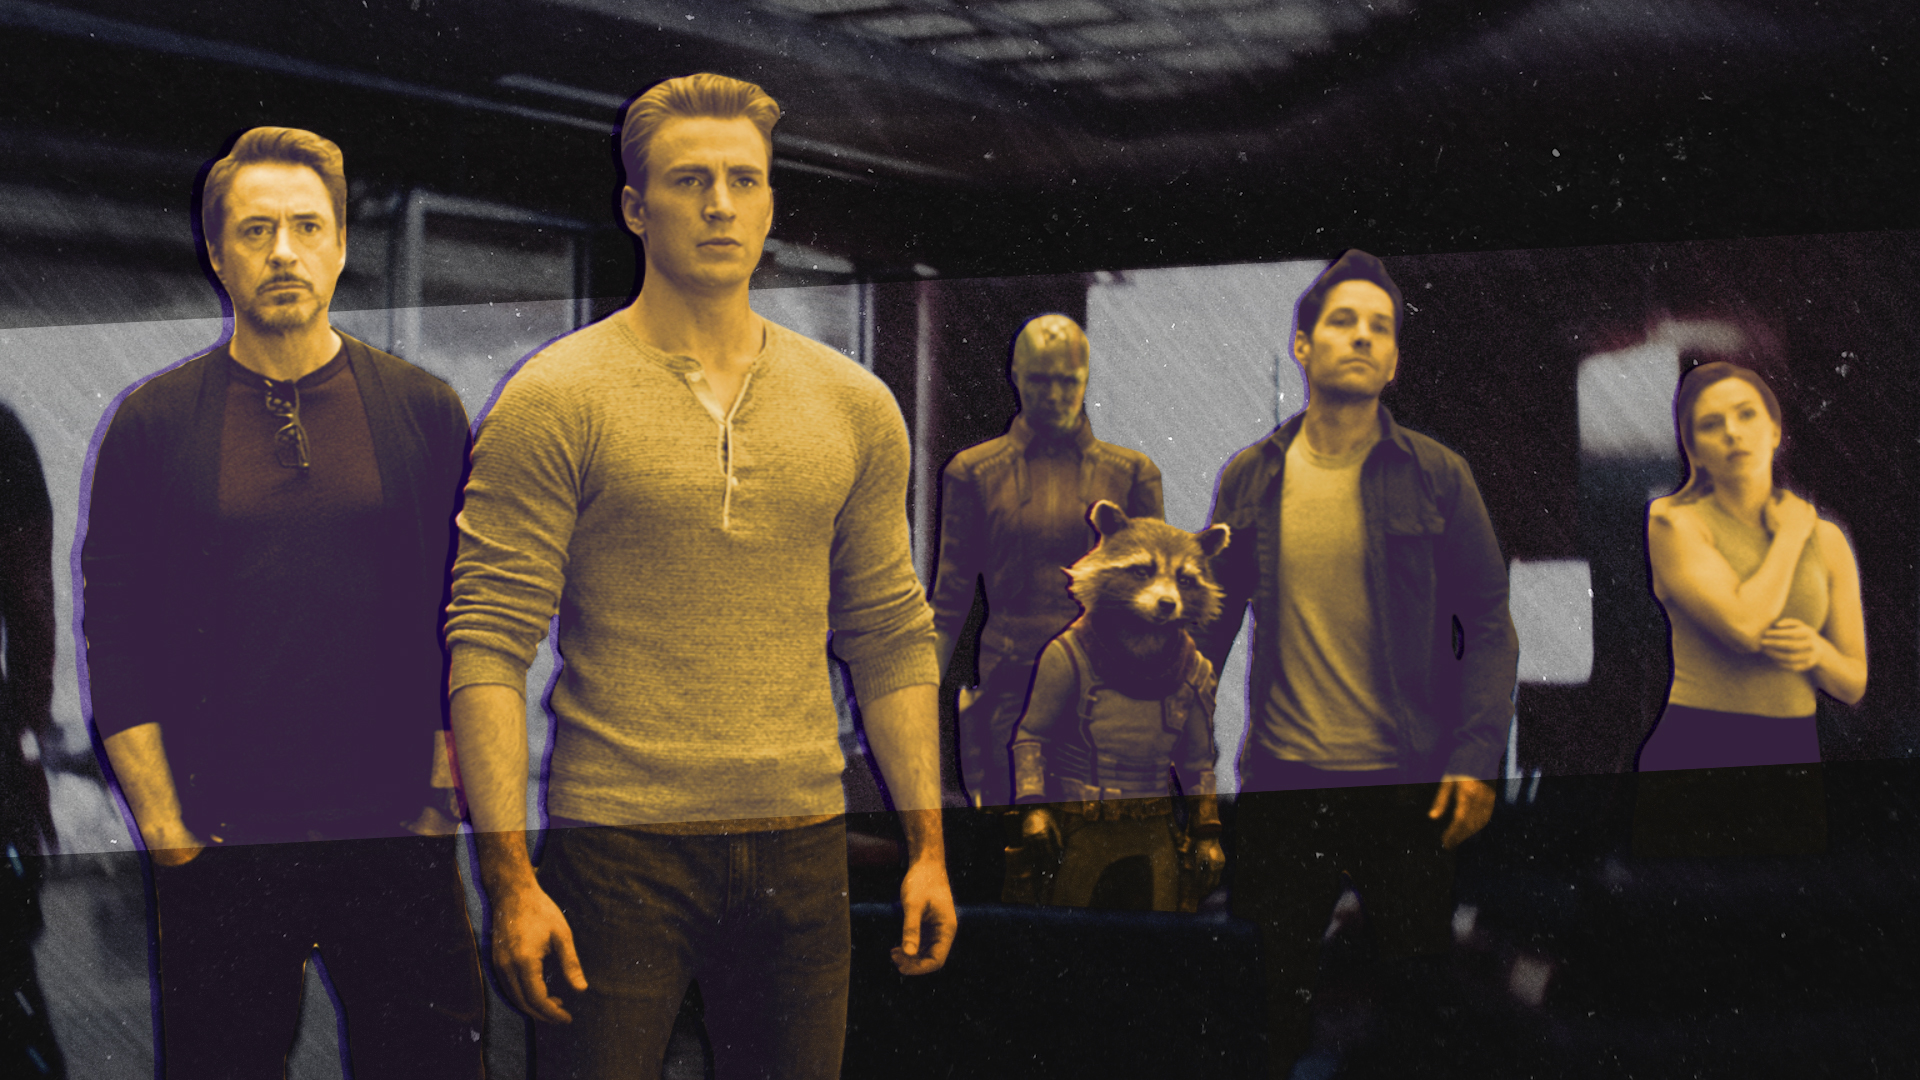 Avengers: Endgame is an extraordinary feat of storytelling – lovespill